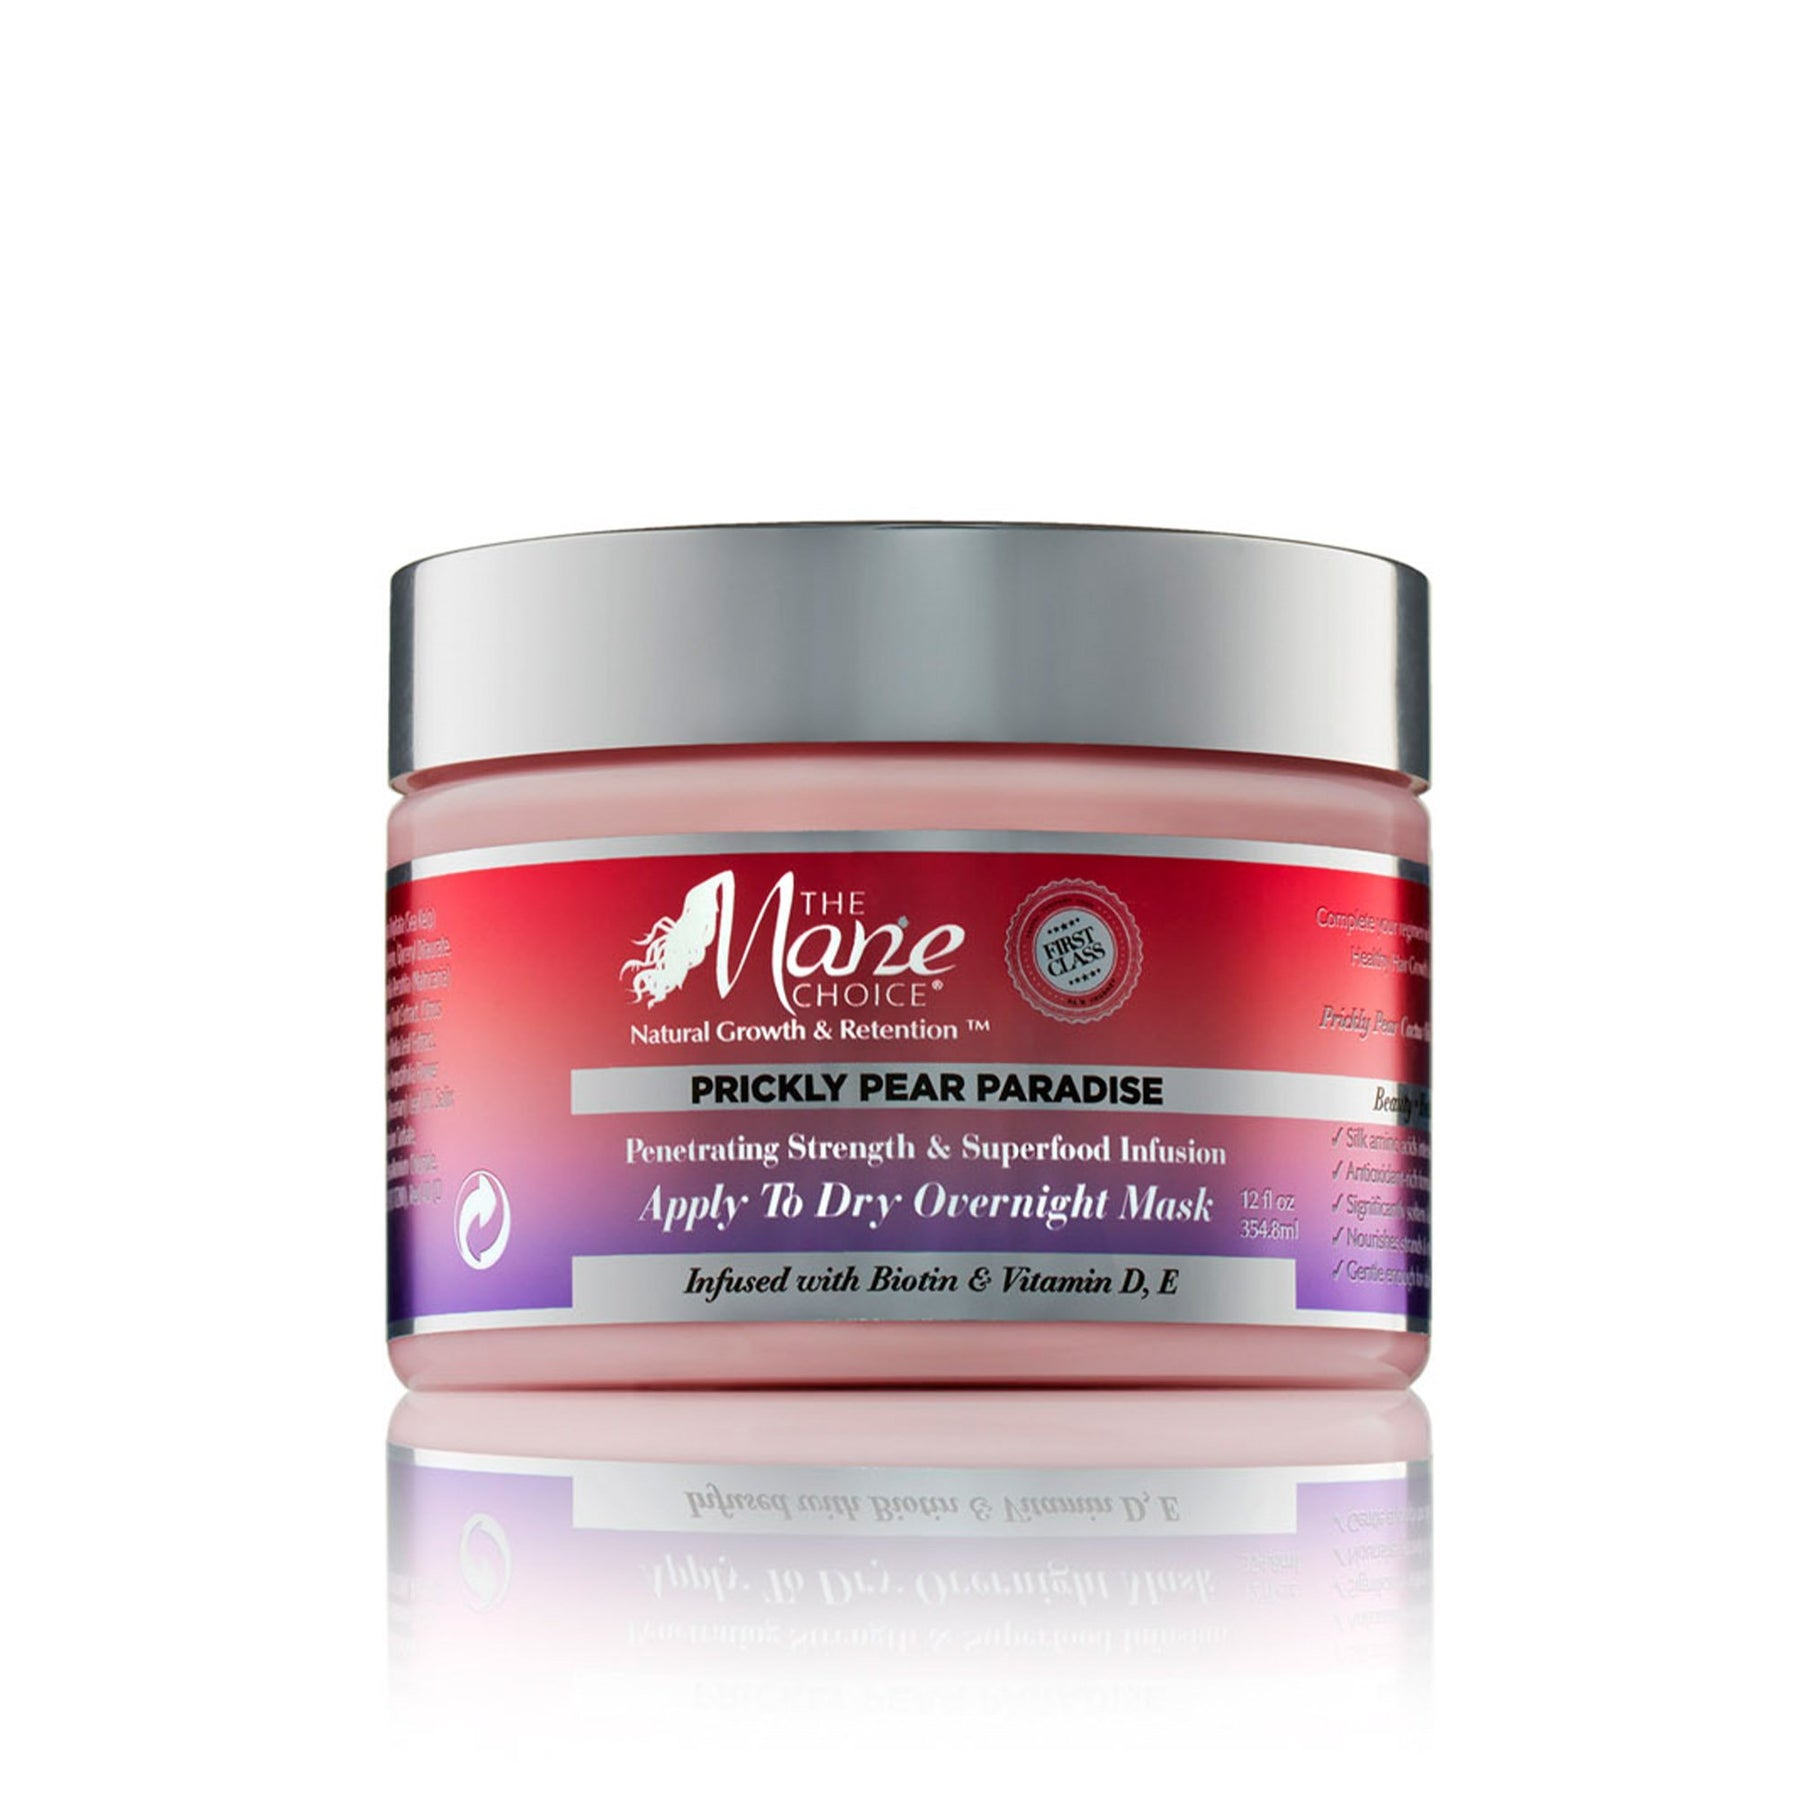  The Mane Choice Prickly Pearl Paradise Apply To Dry Overnight Mask